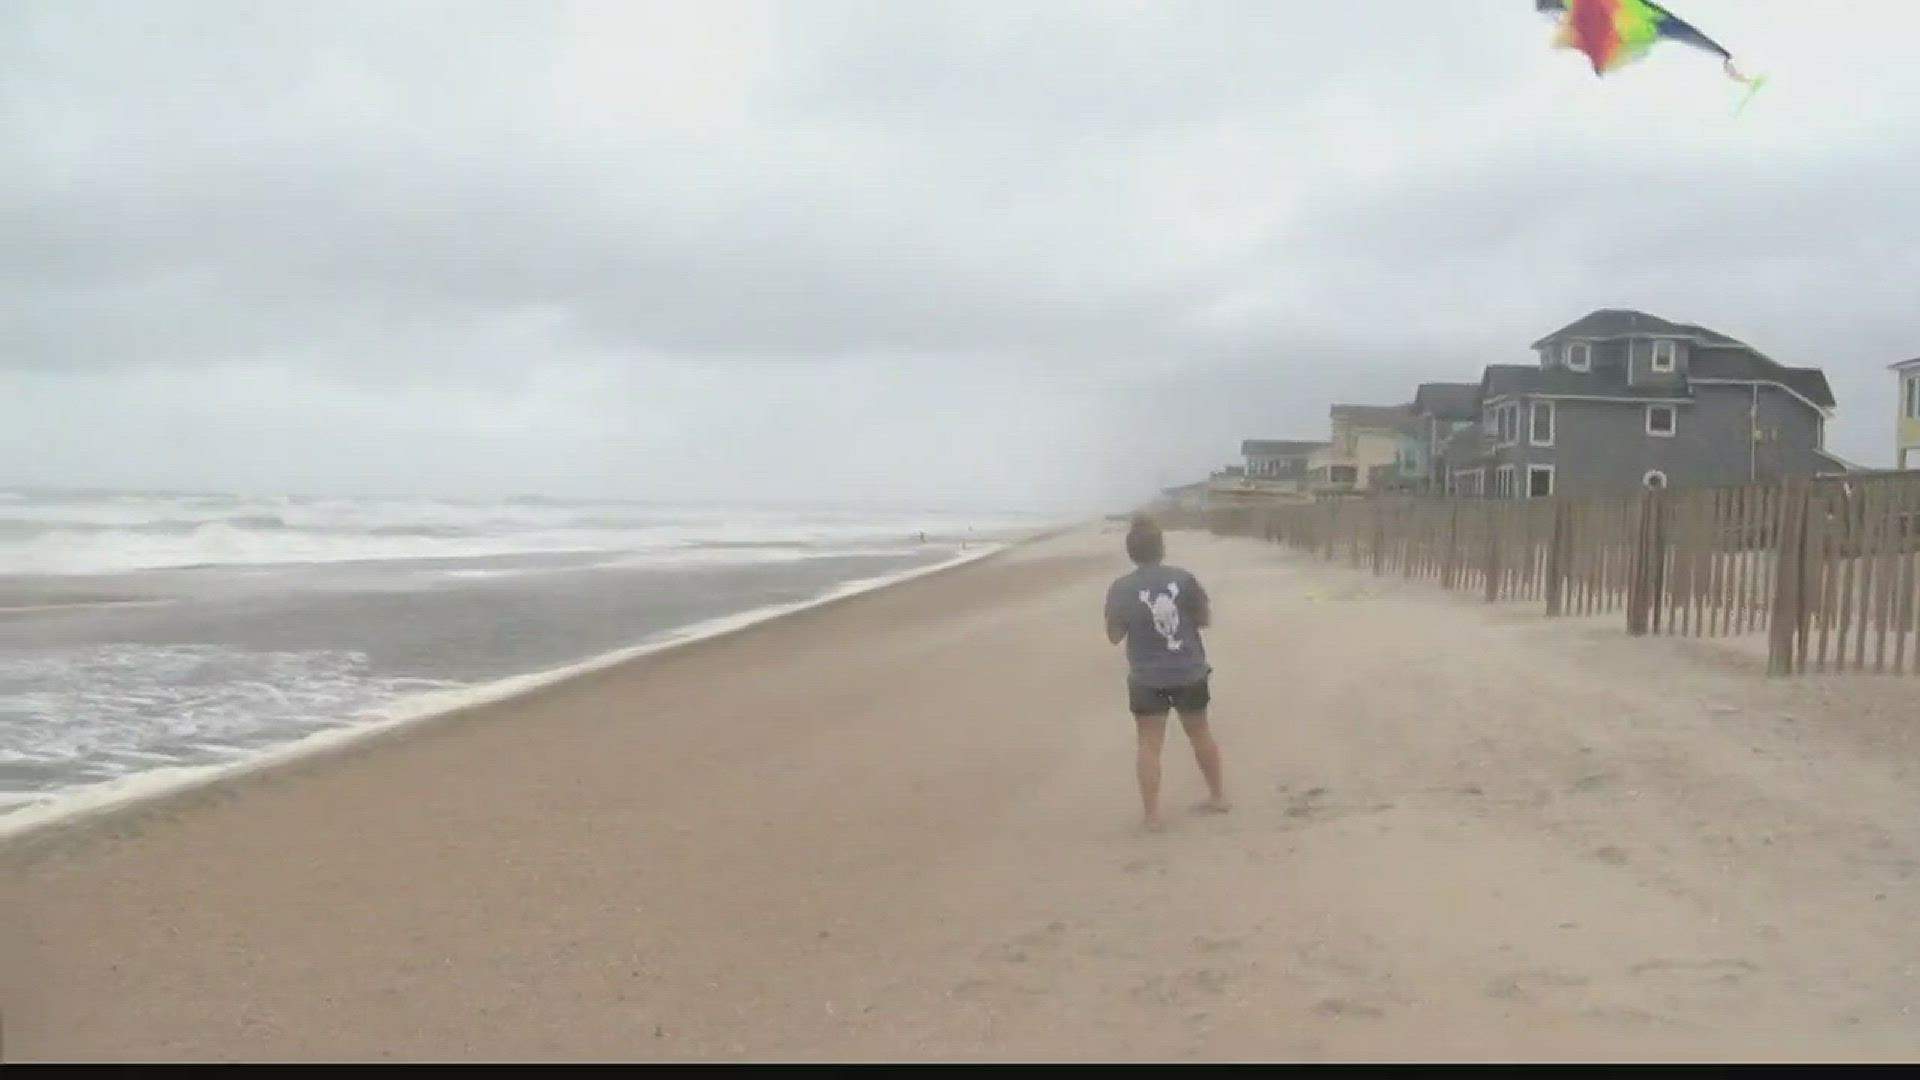 The National Hurricane Center sayid on Wednesday Maria has regained hurricane strength off the coast of North Carolina, but it is also moving away from North Carolina.